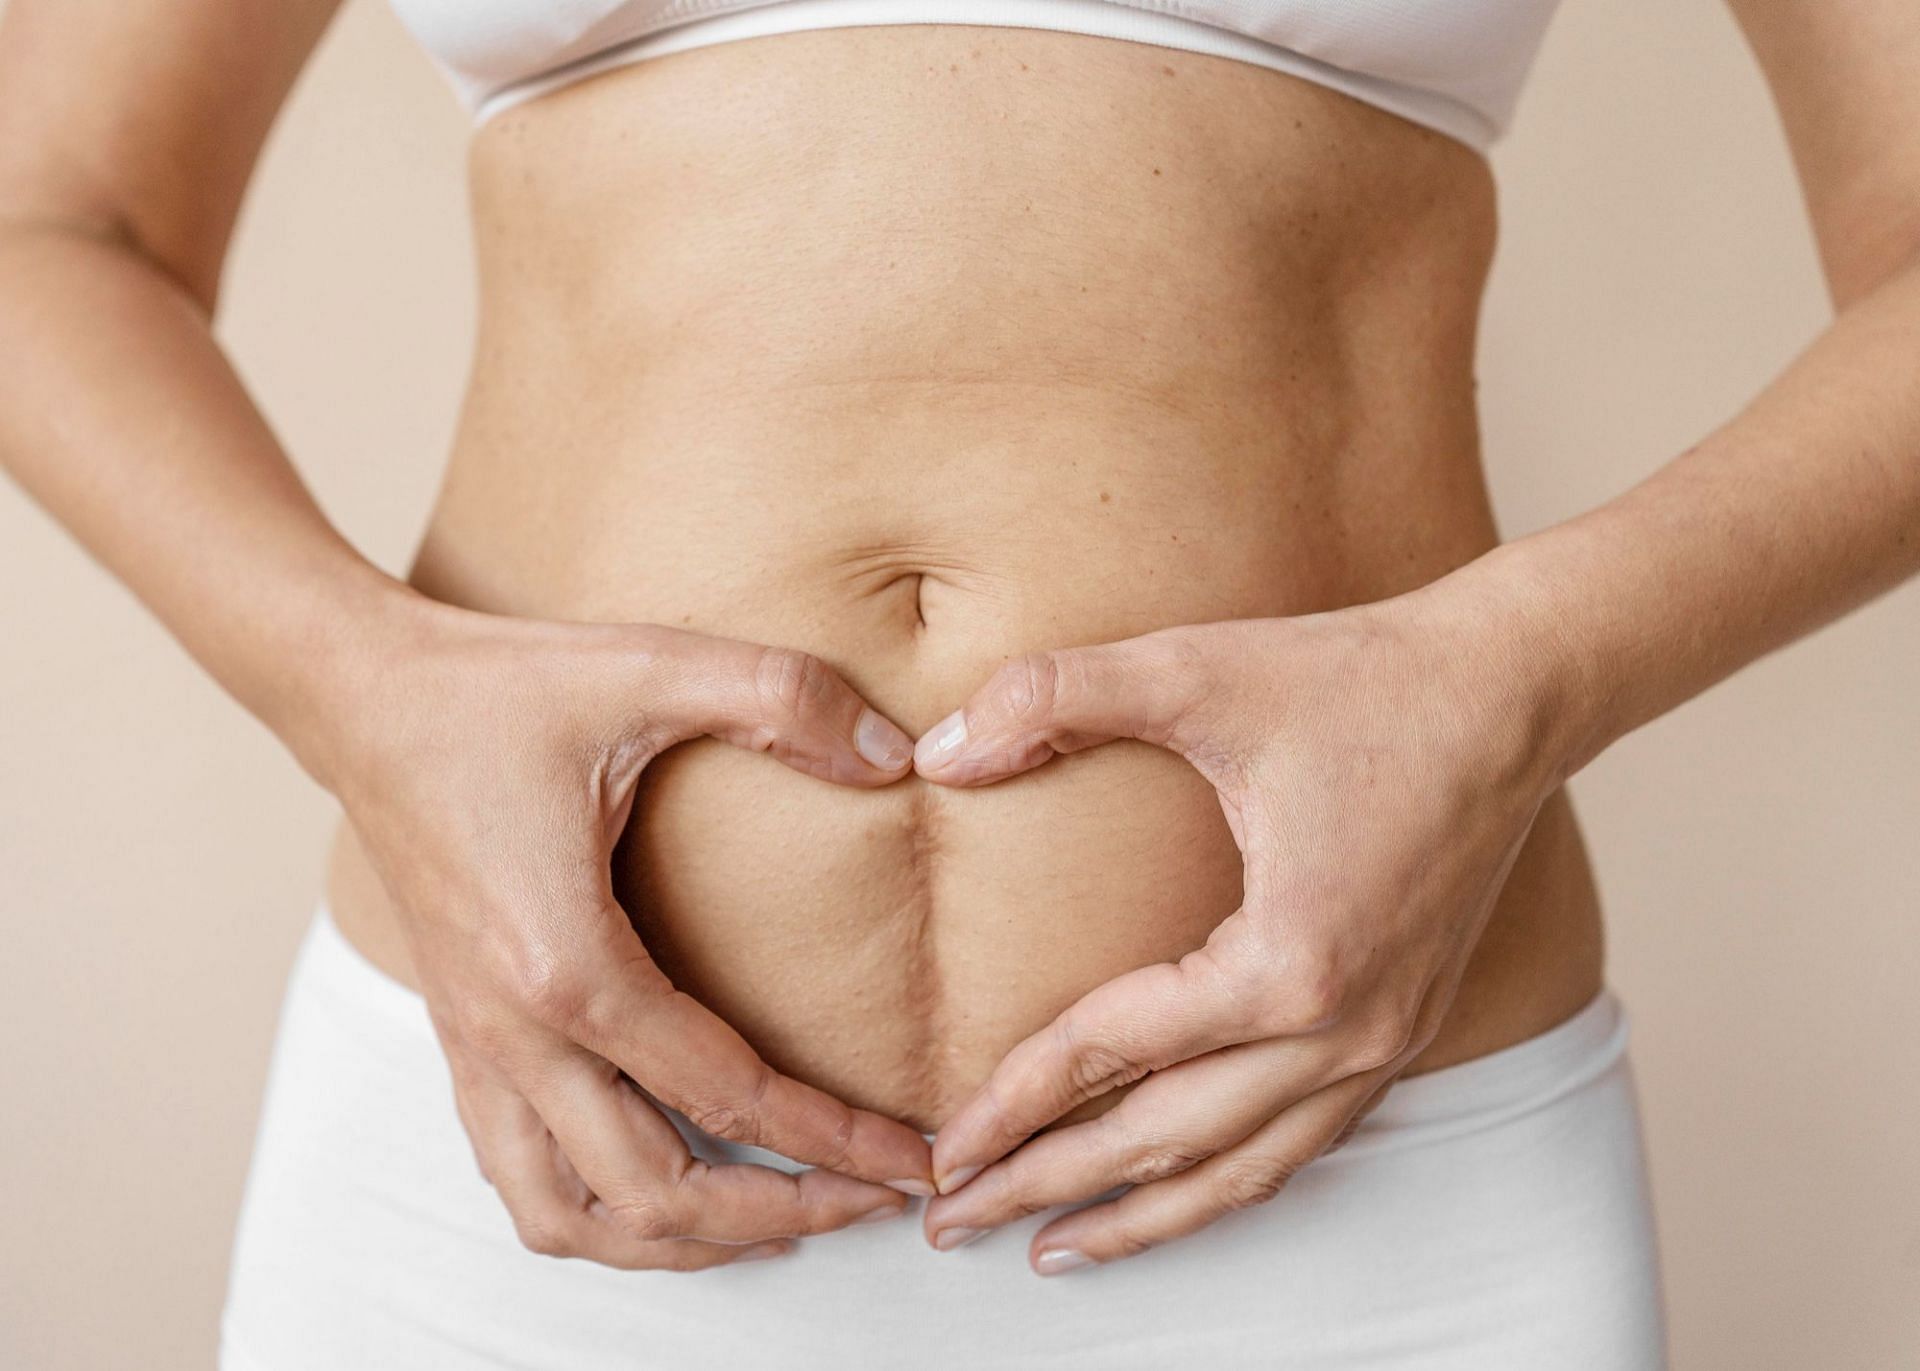 Tips for weight loss after a C-section. (Photo via Freepik)